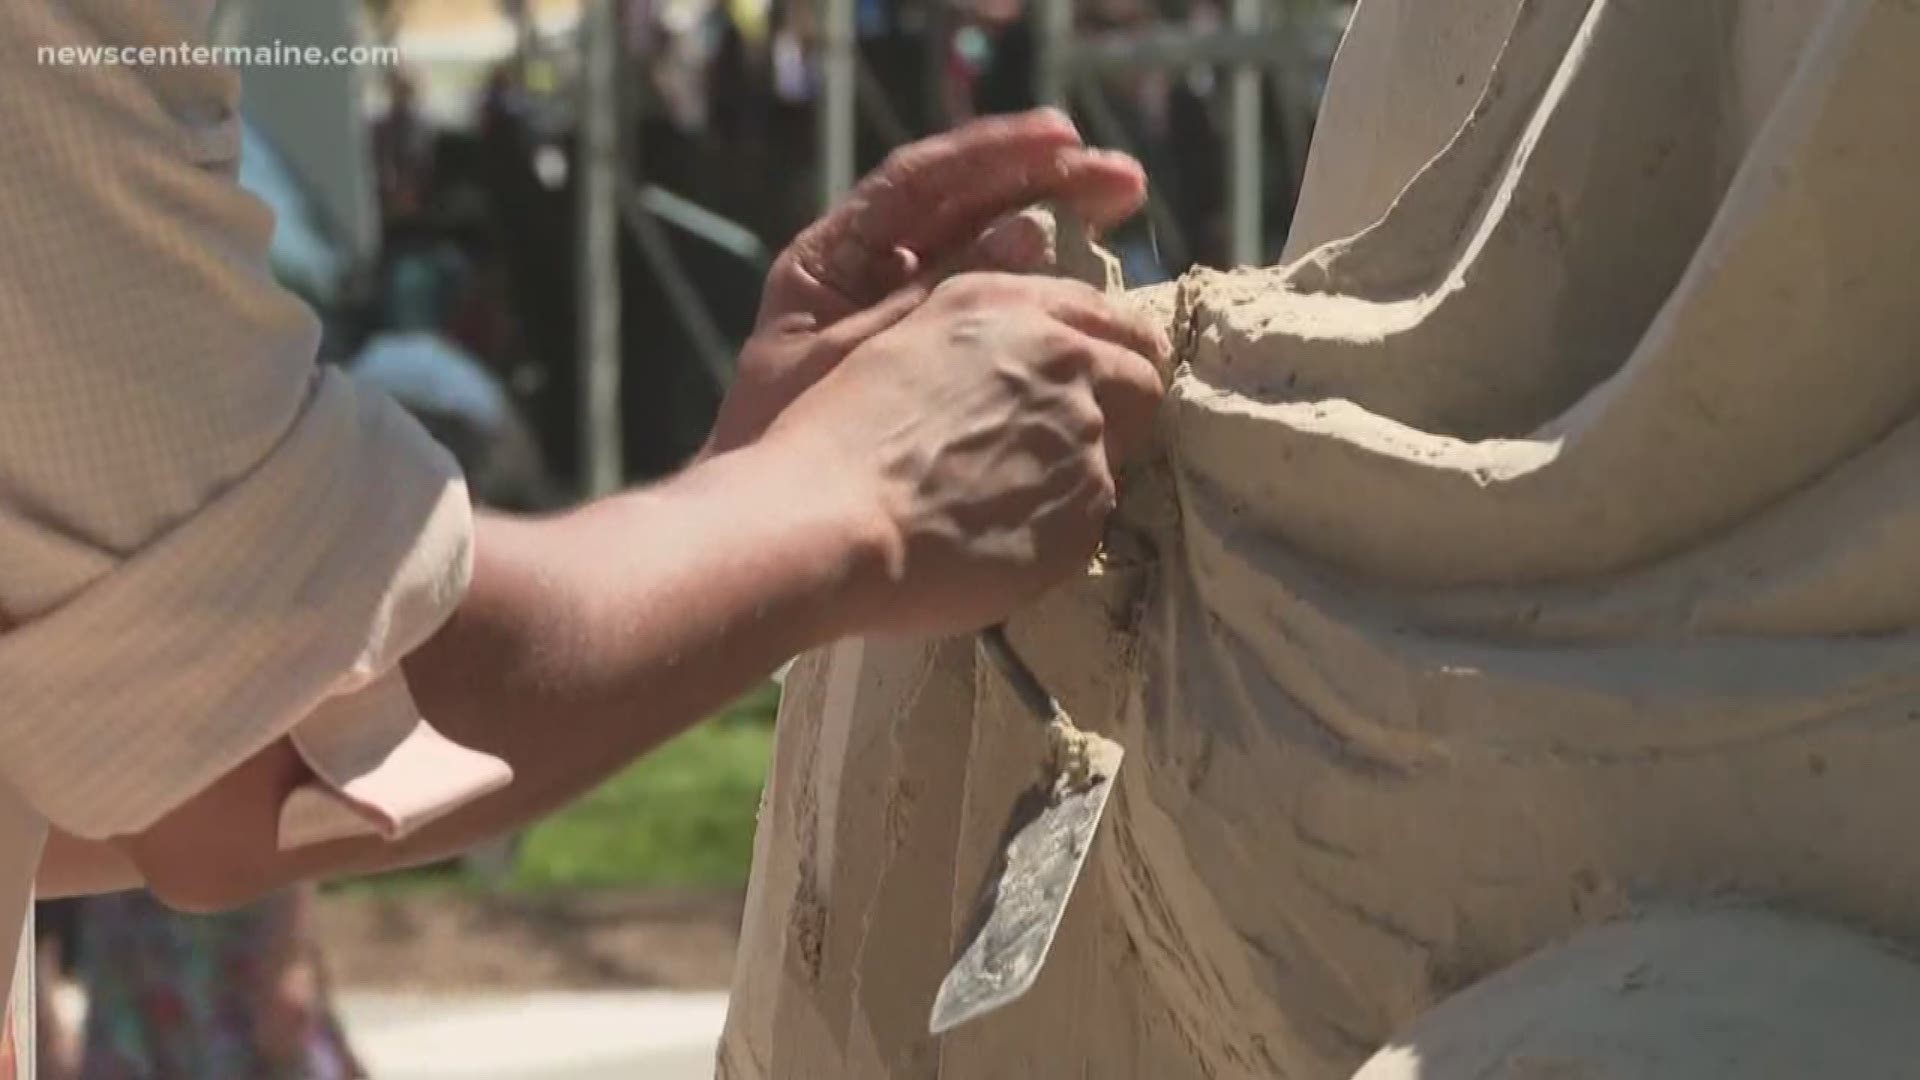 Eight sculptors from around the U.S. and Canada are using 60 tons of sand to create sculptures at the Yarmouth Clam Festival in 2019.